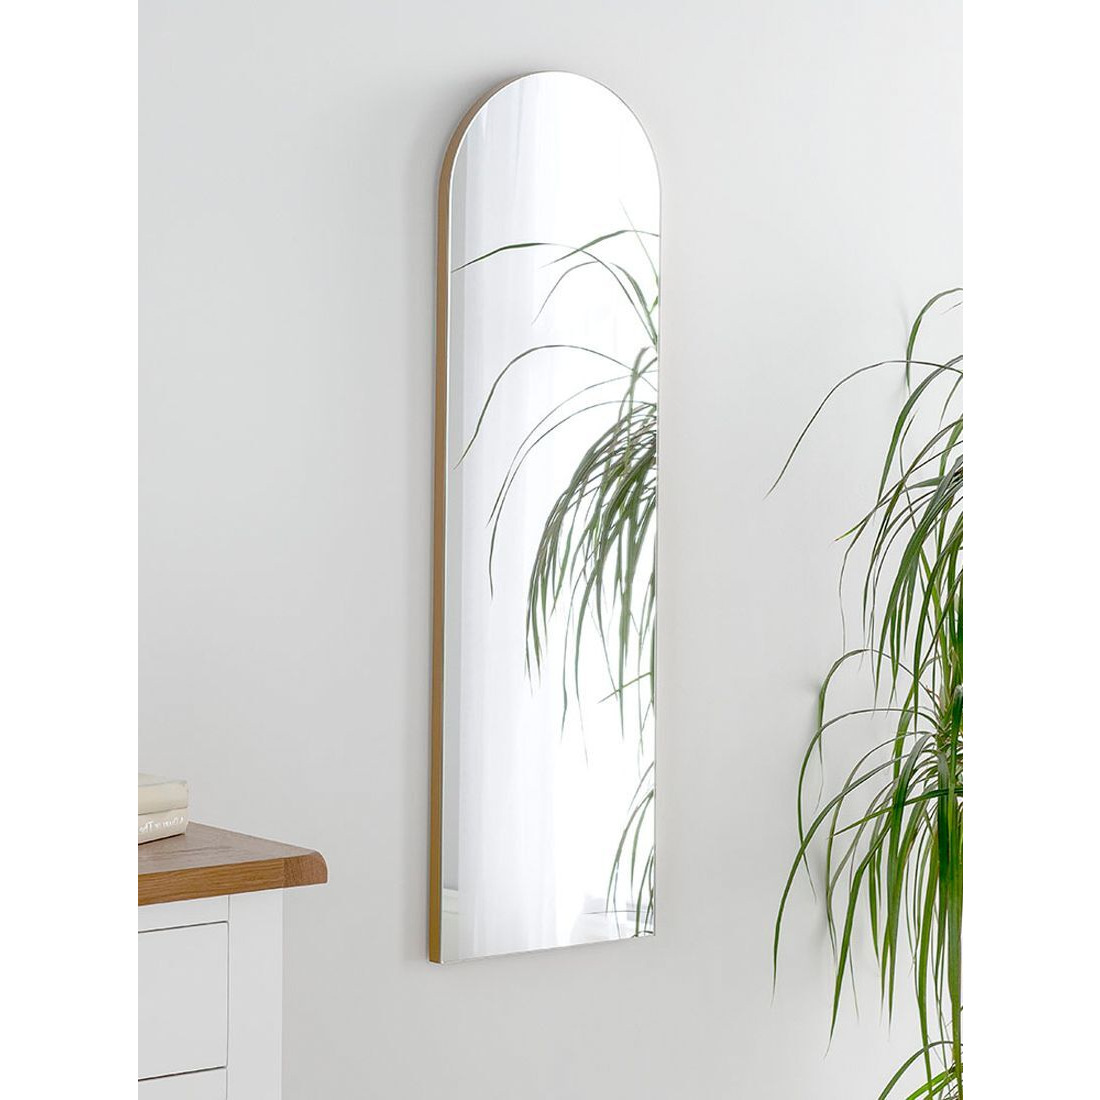 Yearn Delicacy Arched Wood Frame Wall Mirror, 100 x 30cm - image 1